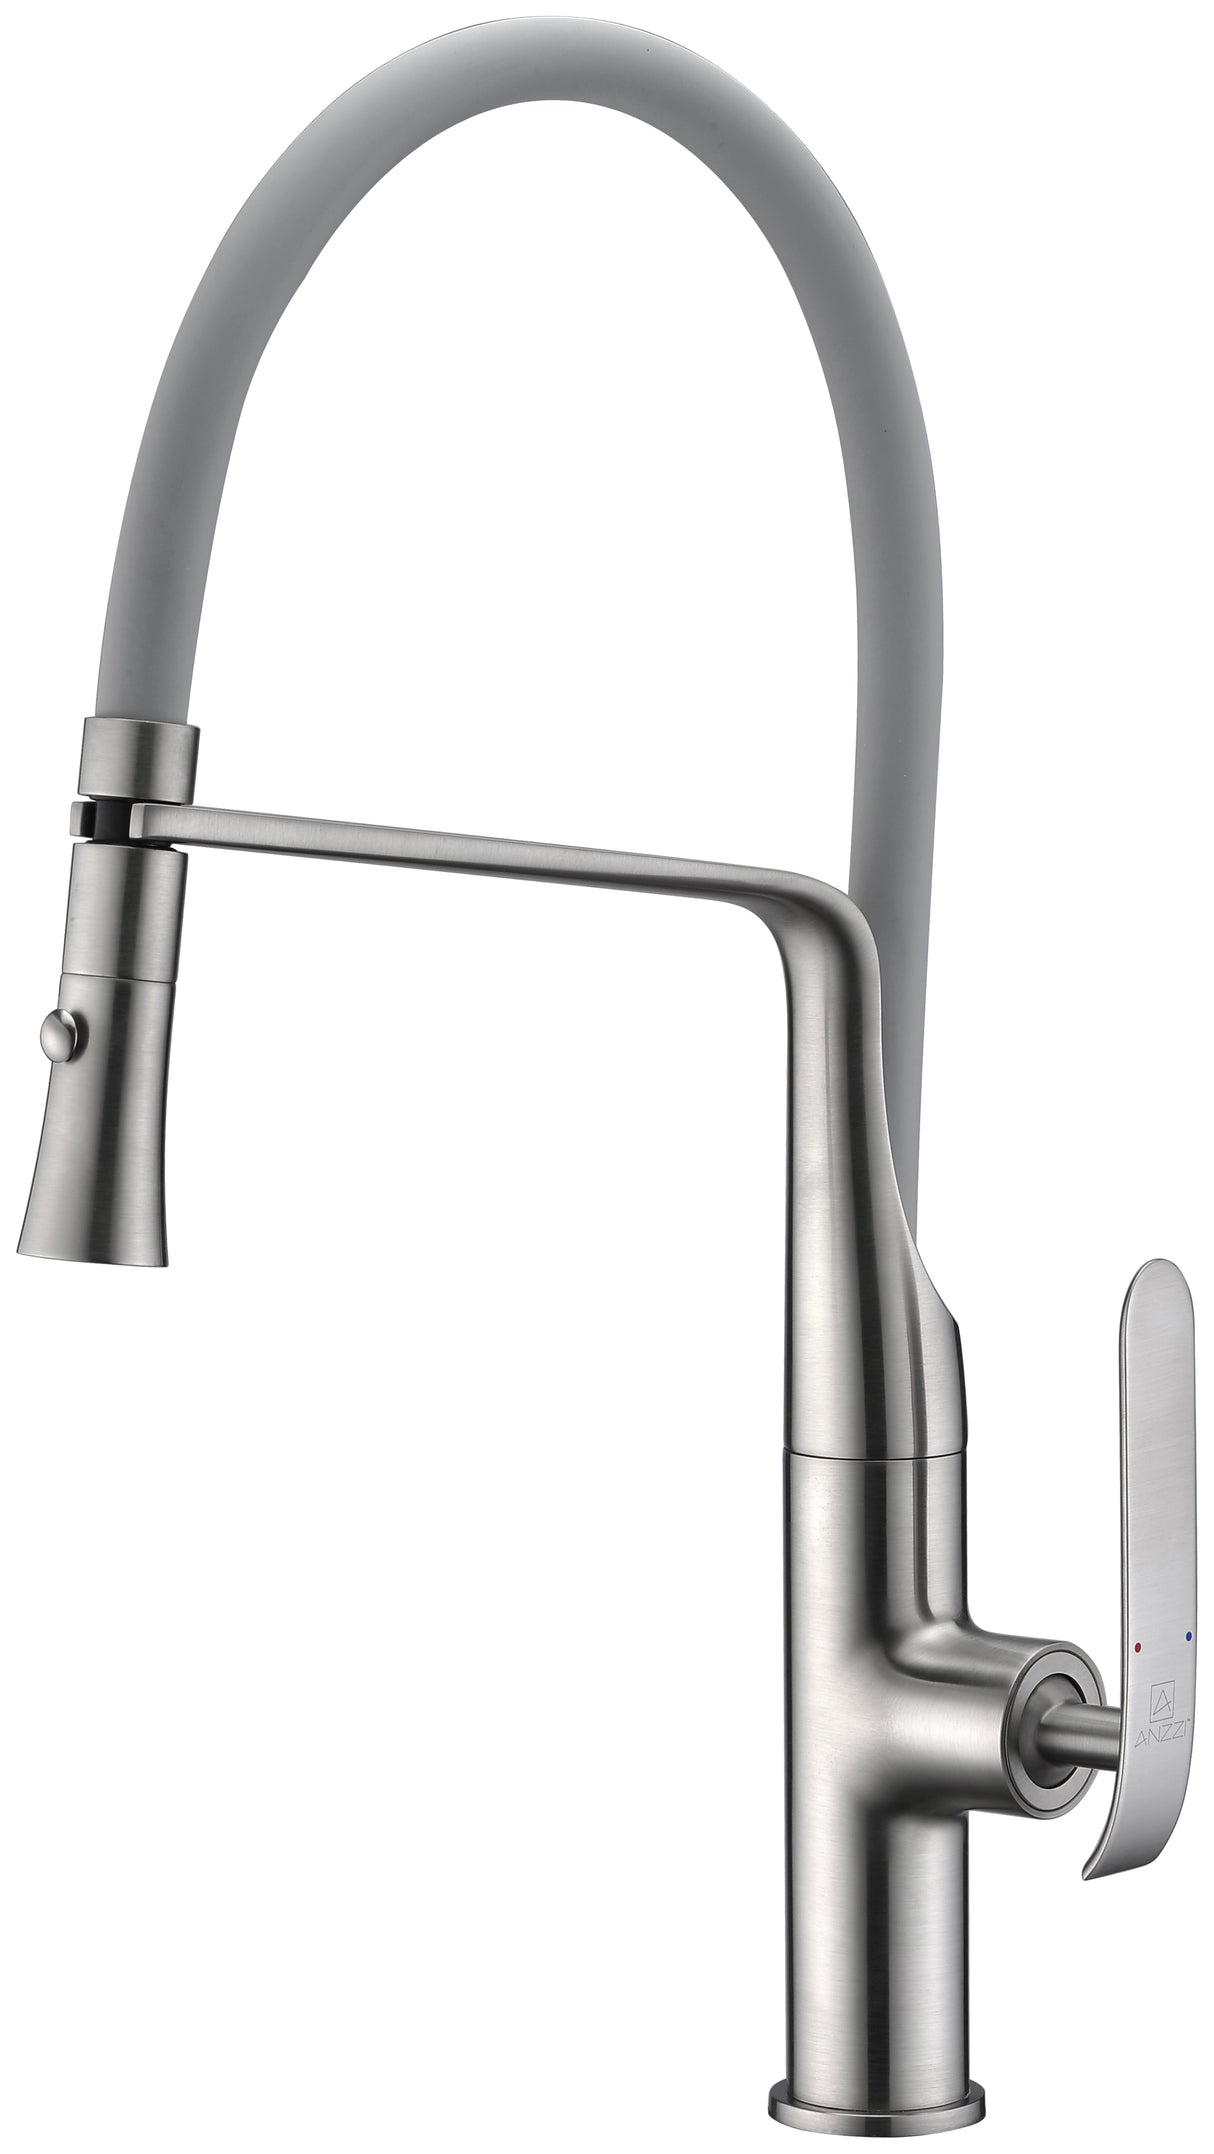 ANZZI KF-AZ003BN Accent Single Handle Pull-Down Sprayer Kitchen Faucet in Brushed Nickel